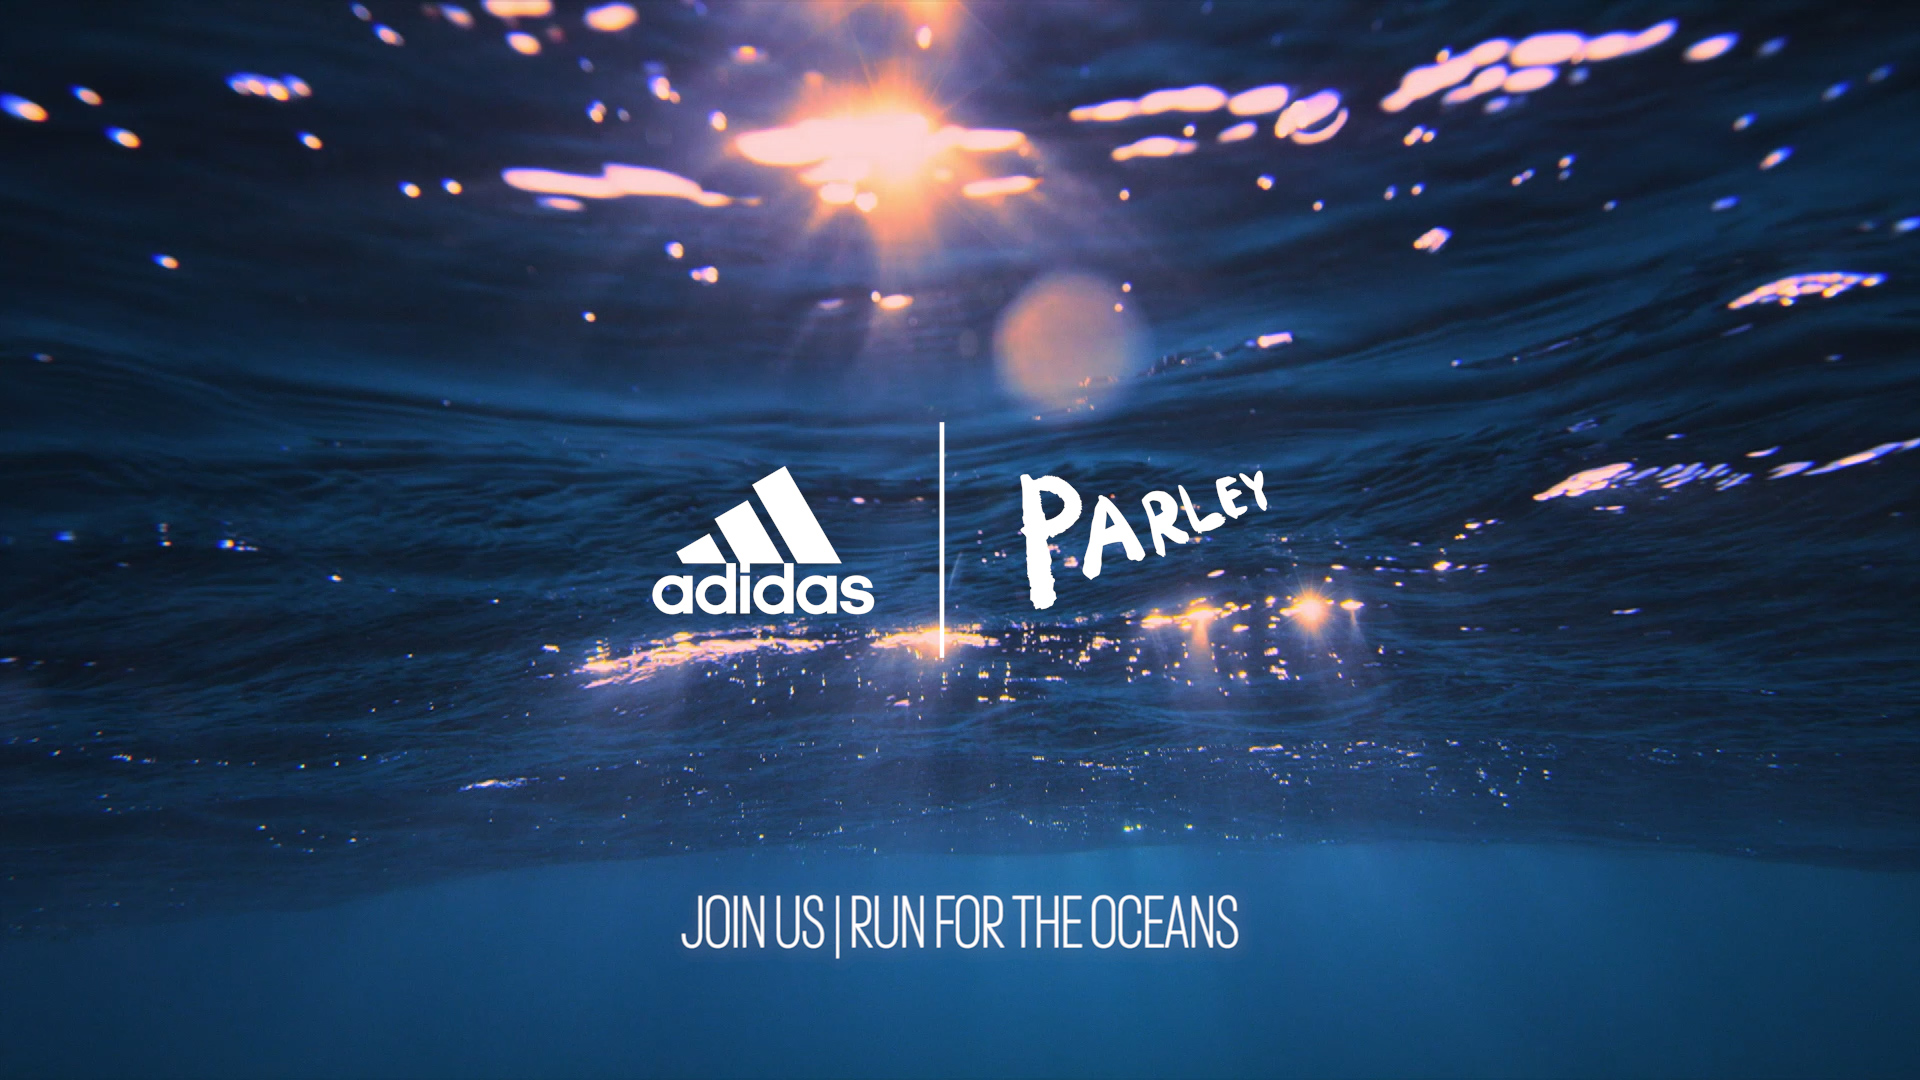 parley for the ocean